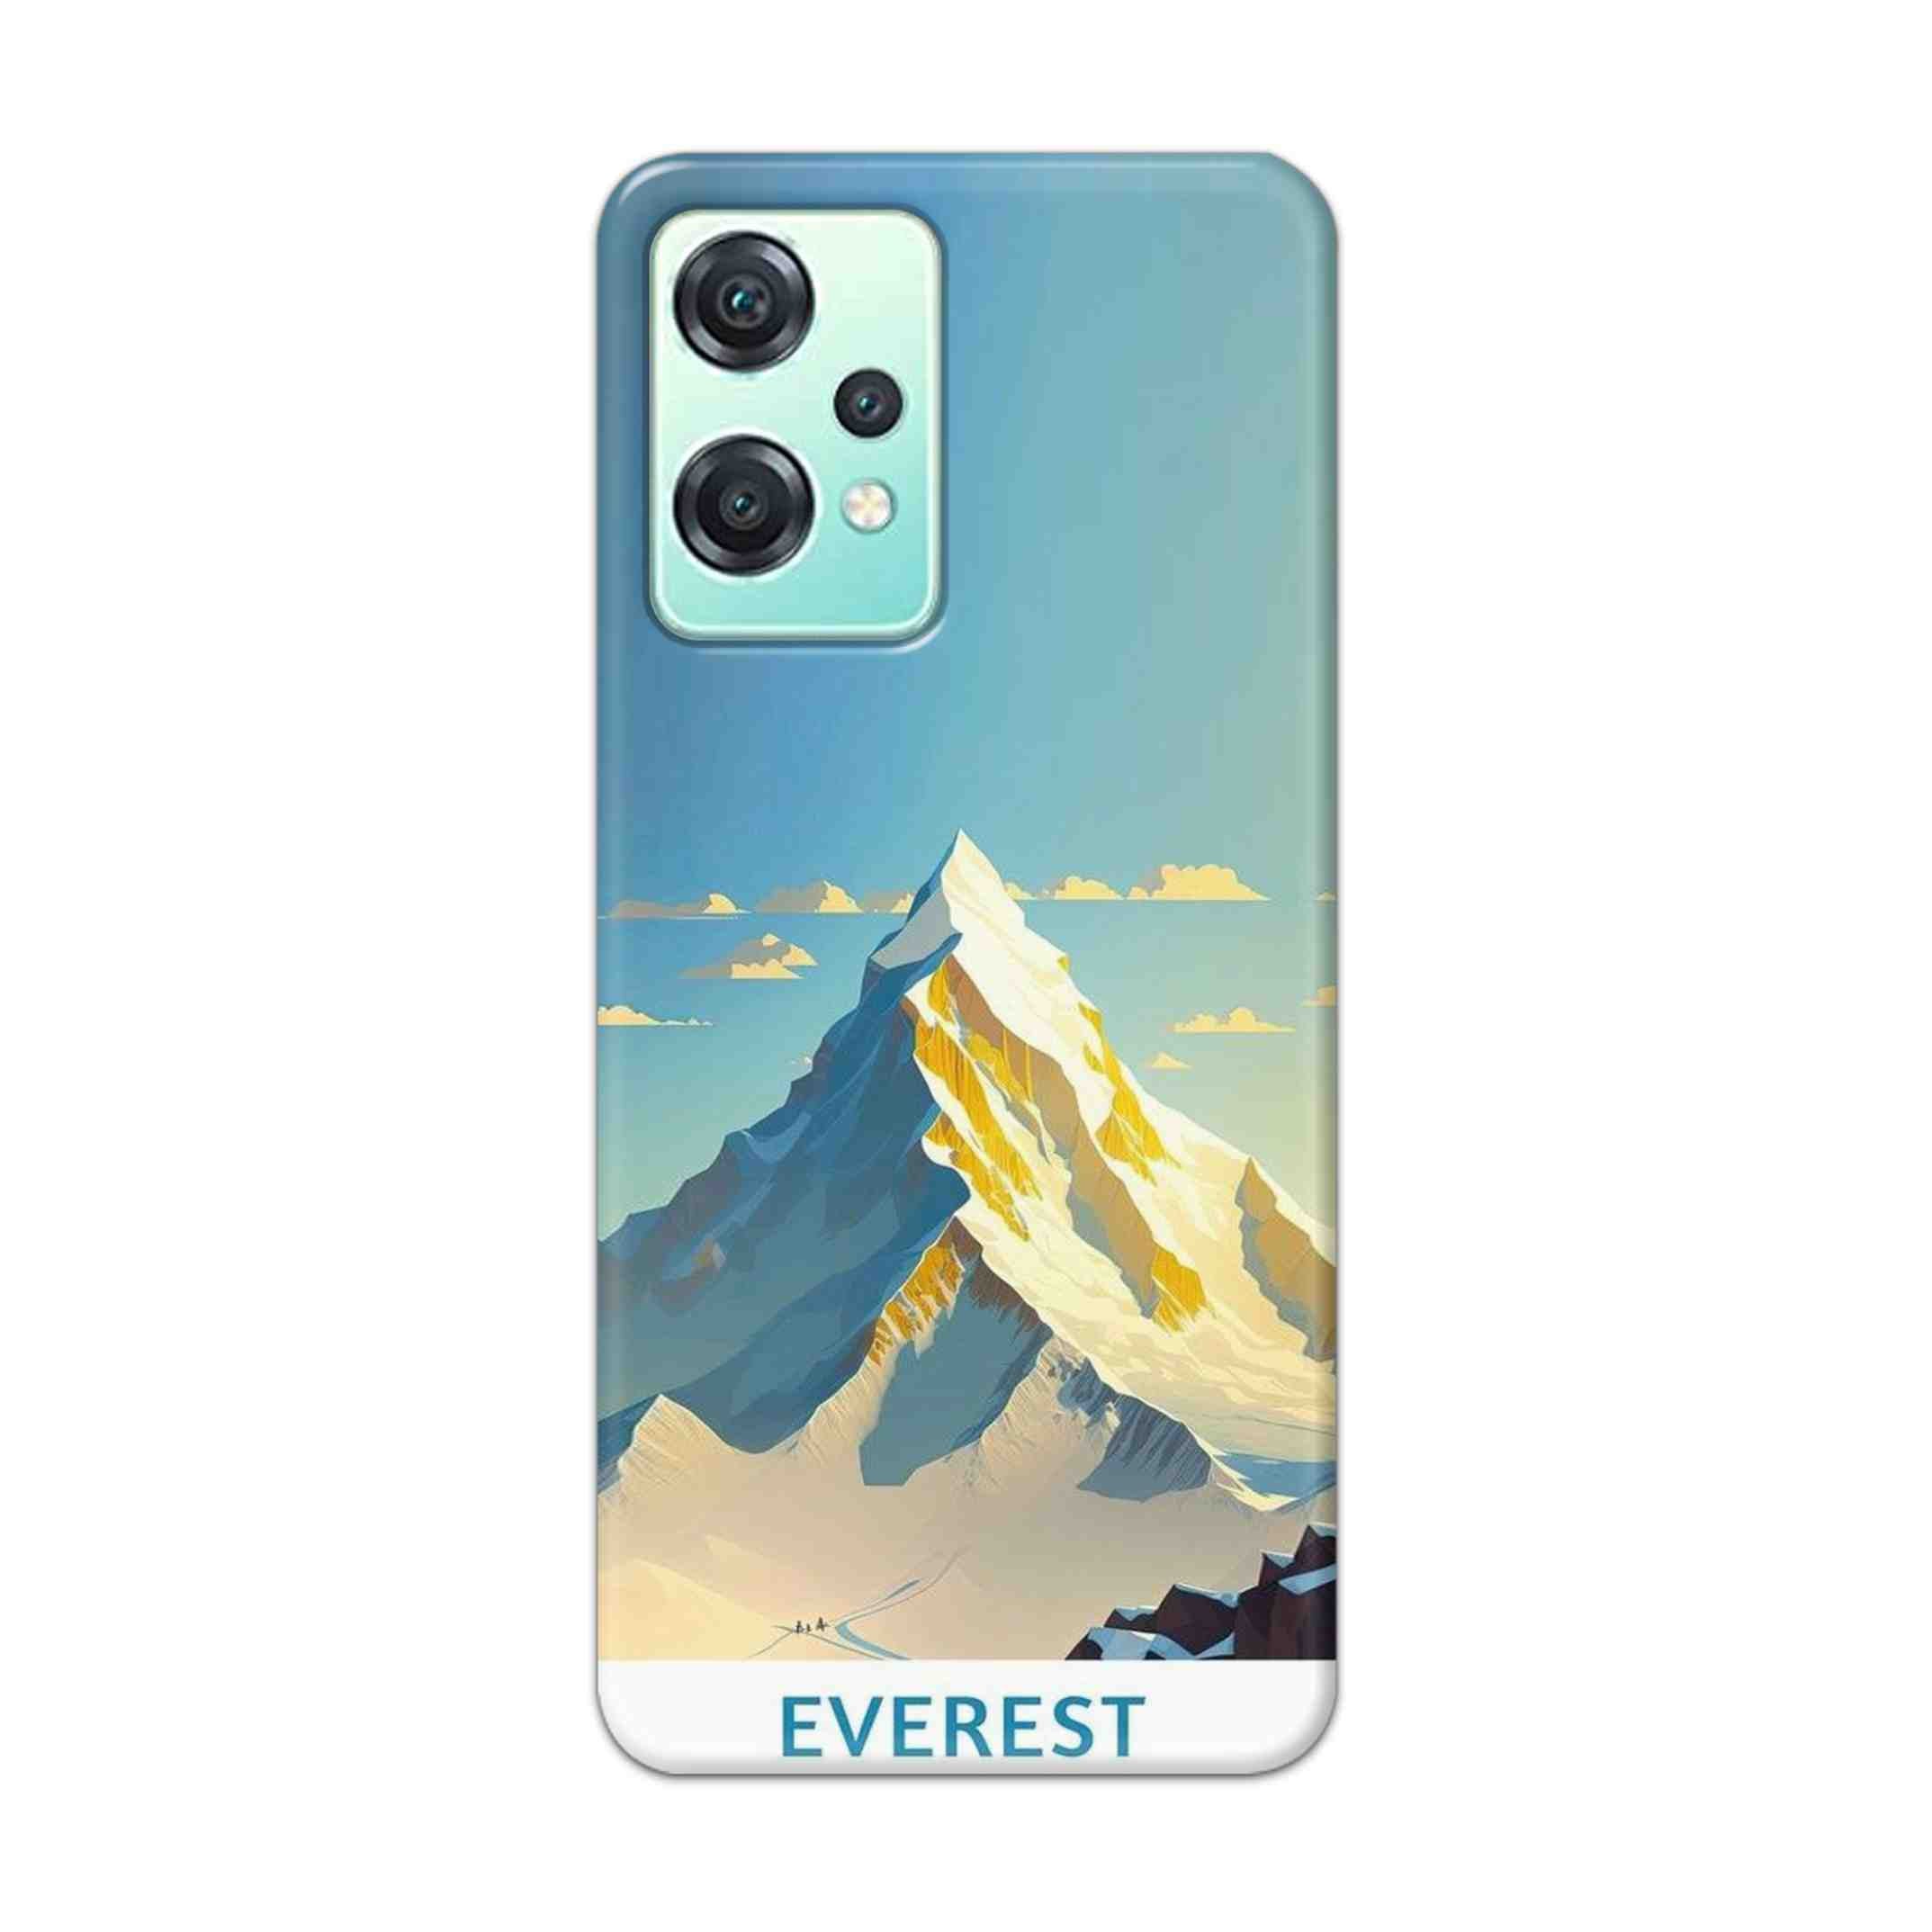 Buy Everest Hard Back Mobile Phone Case Cover For OnePlus Nord CE 2 Lite 5G Online